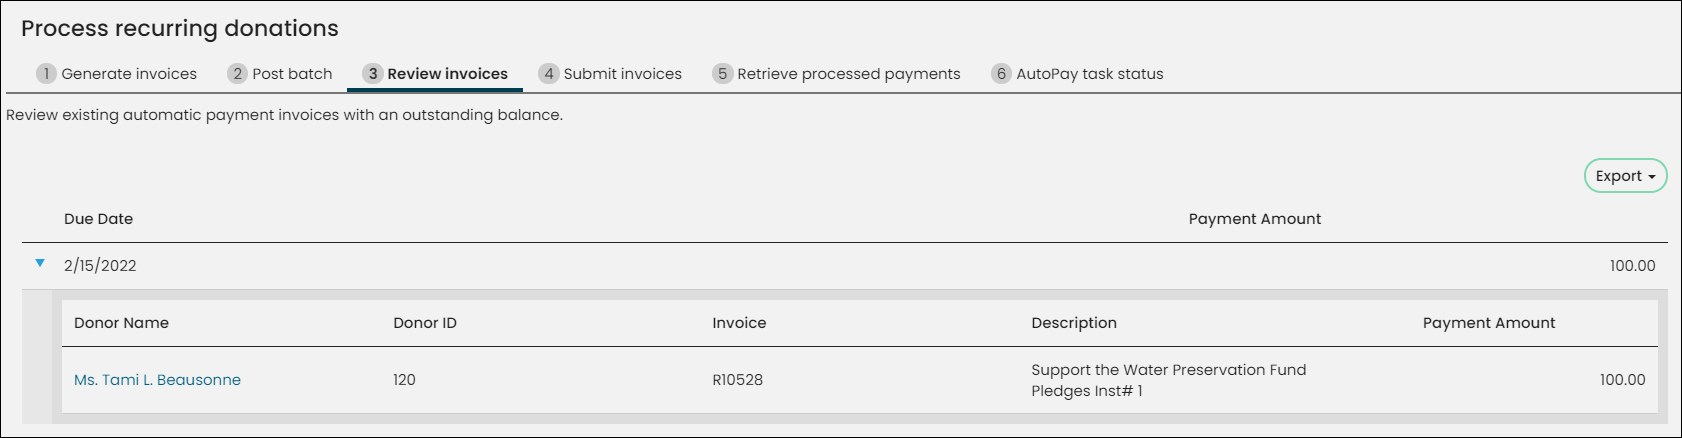 Viewing the Review invoices tab of the Process recurring donations window